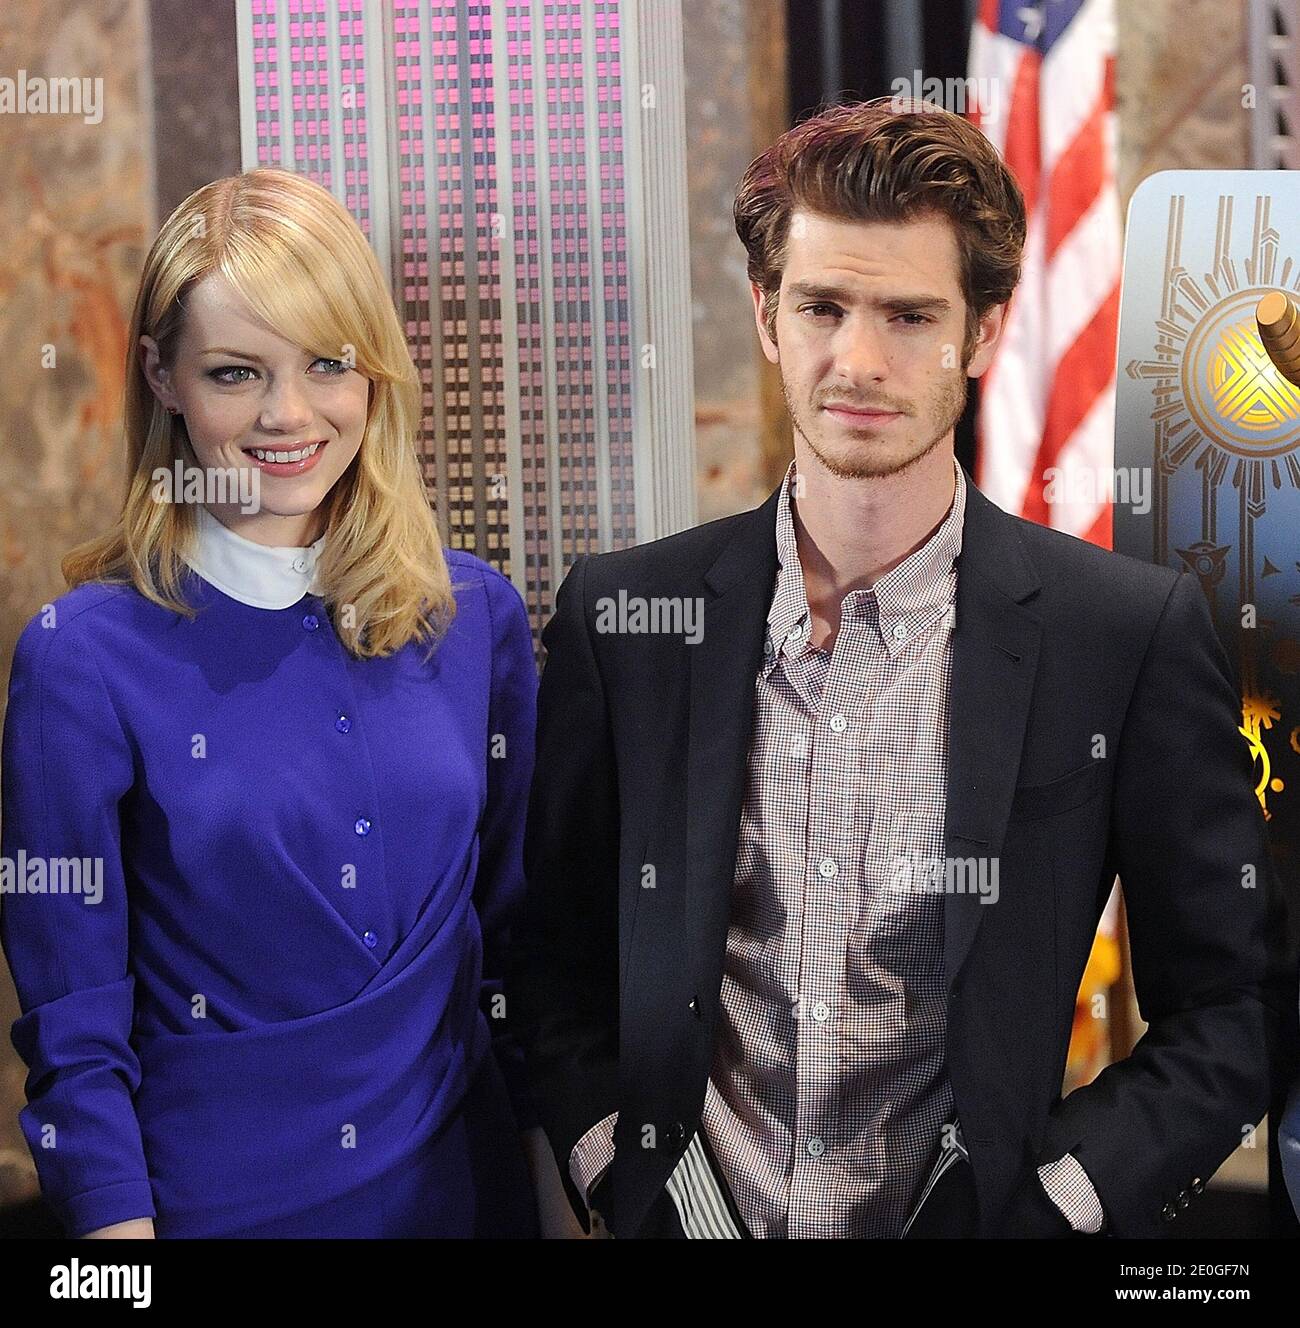 The cast of 'The Amazing Spider-Man 2' light the Empire State Building  Featuring: Matthew Tolmach